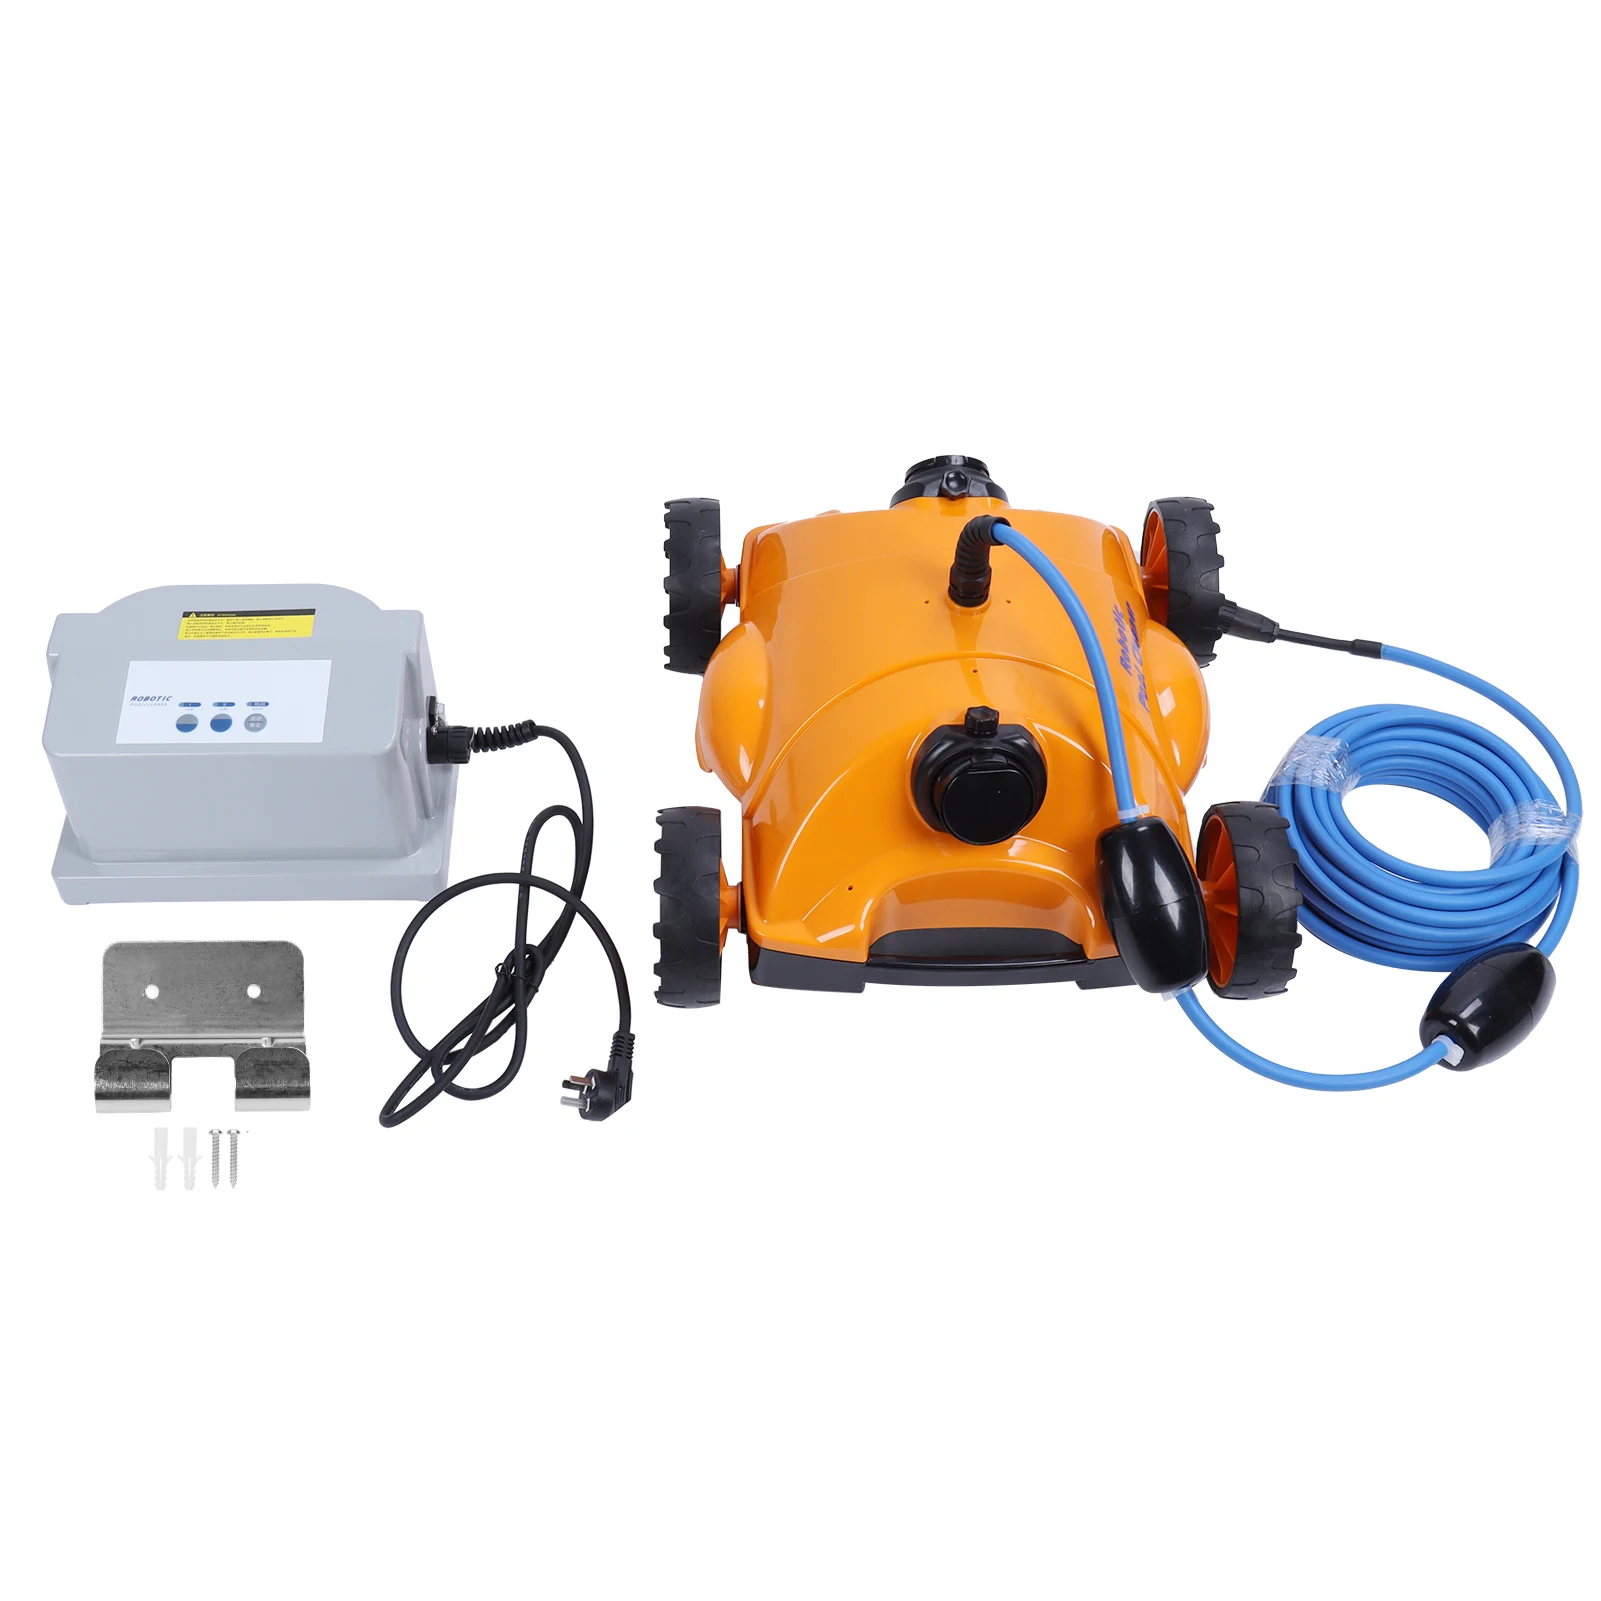 

Floating Robotic Pool Cleaner Kit Underwater Automatic Vacuum Suction Cleaning Machine AU Plug 220V Swimming Pool Equipment